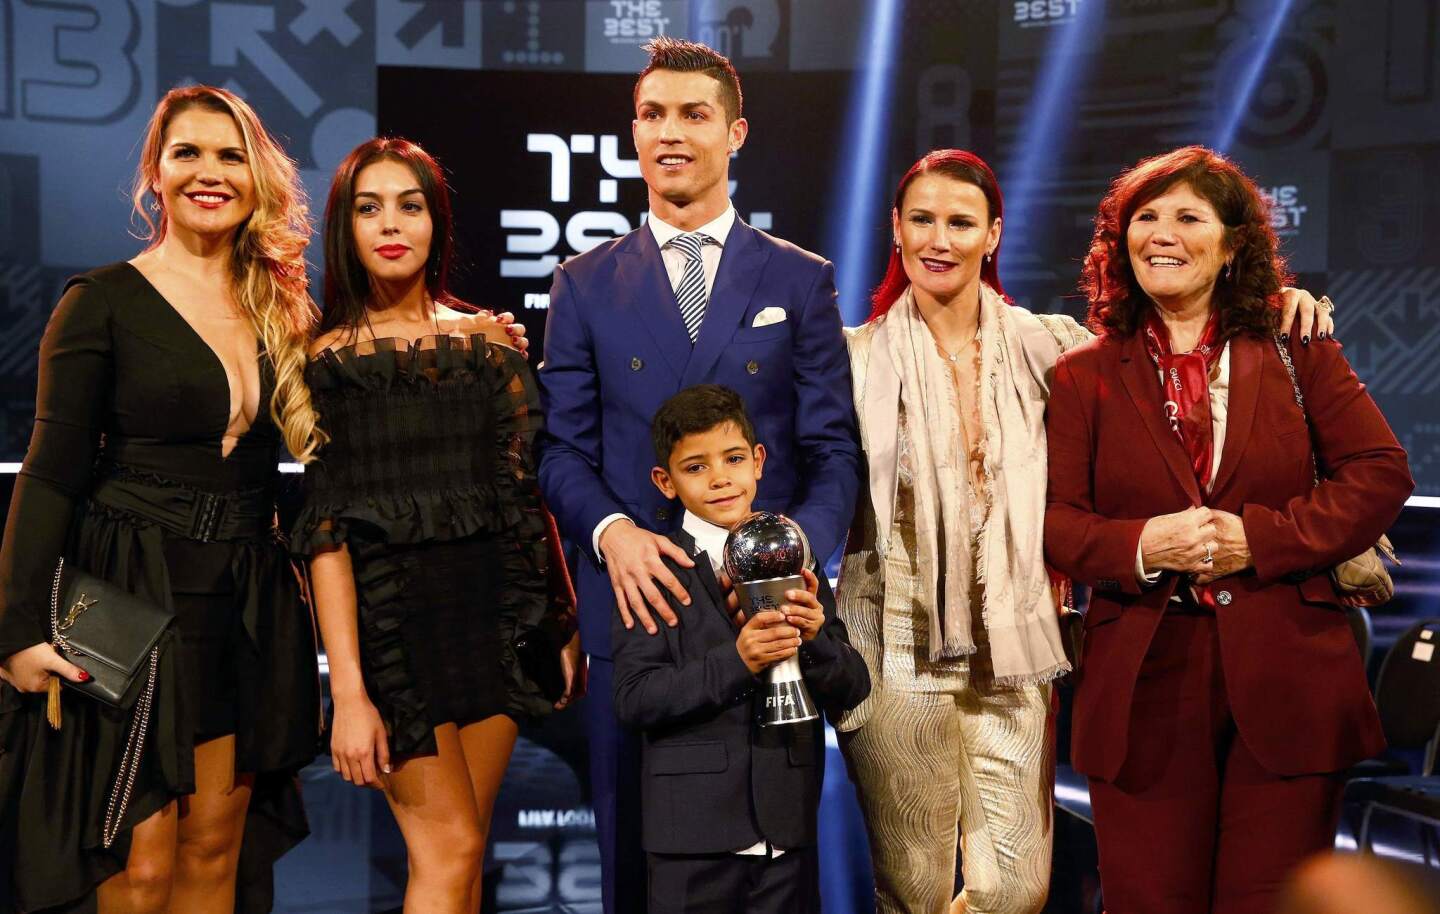 Football Soccer - FIFA Awards Ceremony - Best Men's Player - Zurich, Switzerland - 09/01/17. Cristiano Ronaldo poses with Georgina Rodriguez, his son Cristiano Ronaldo Jr, his mother Maria and his two sisters Telma and Katia after winning with the award. REUTERS/Ruben Sprich ** Usable by SD ONLY **